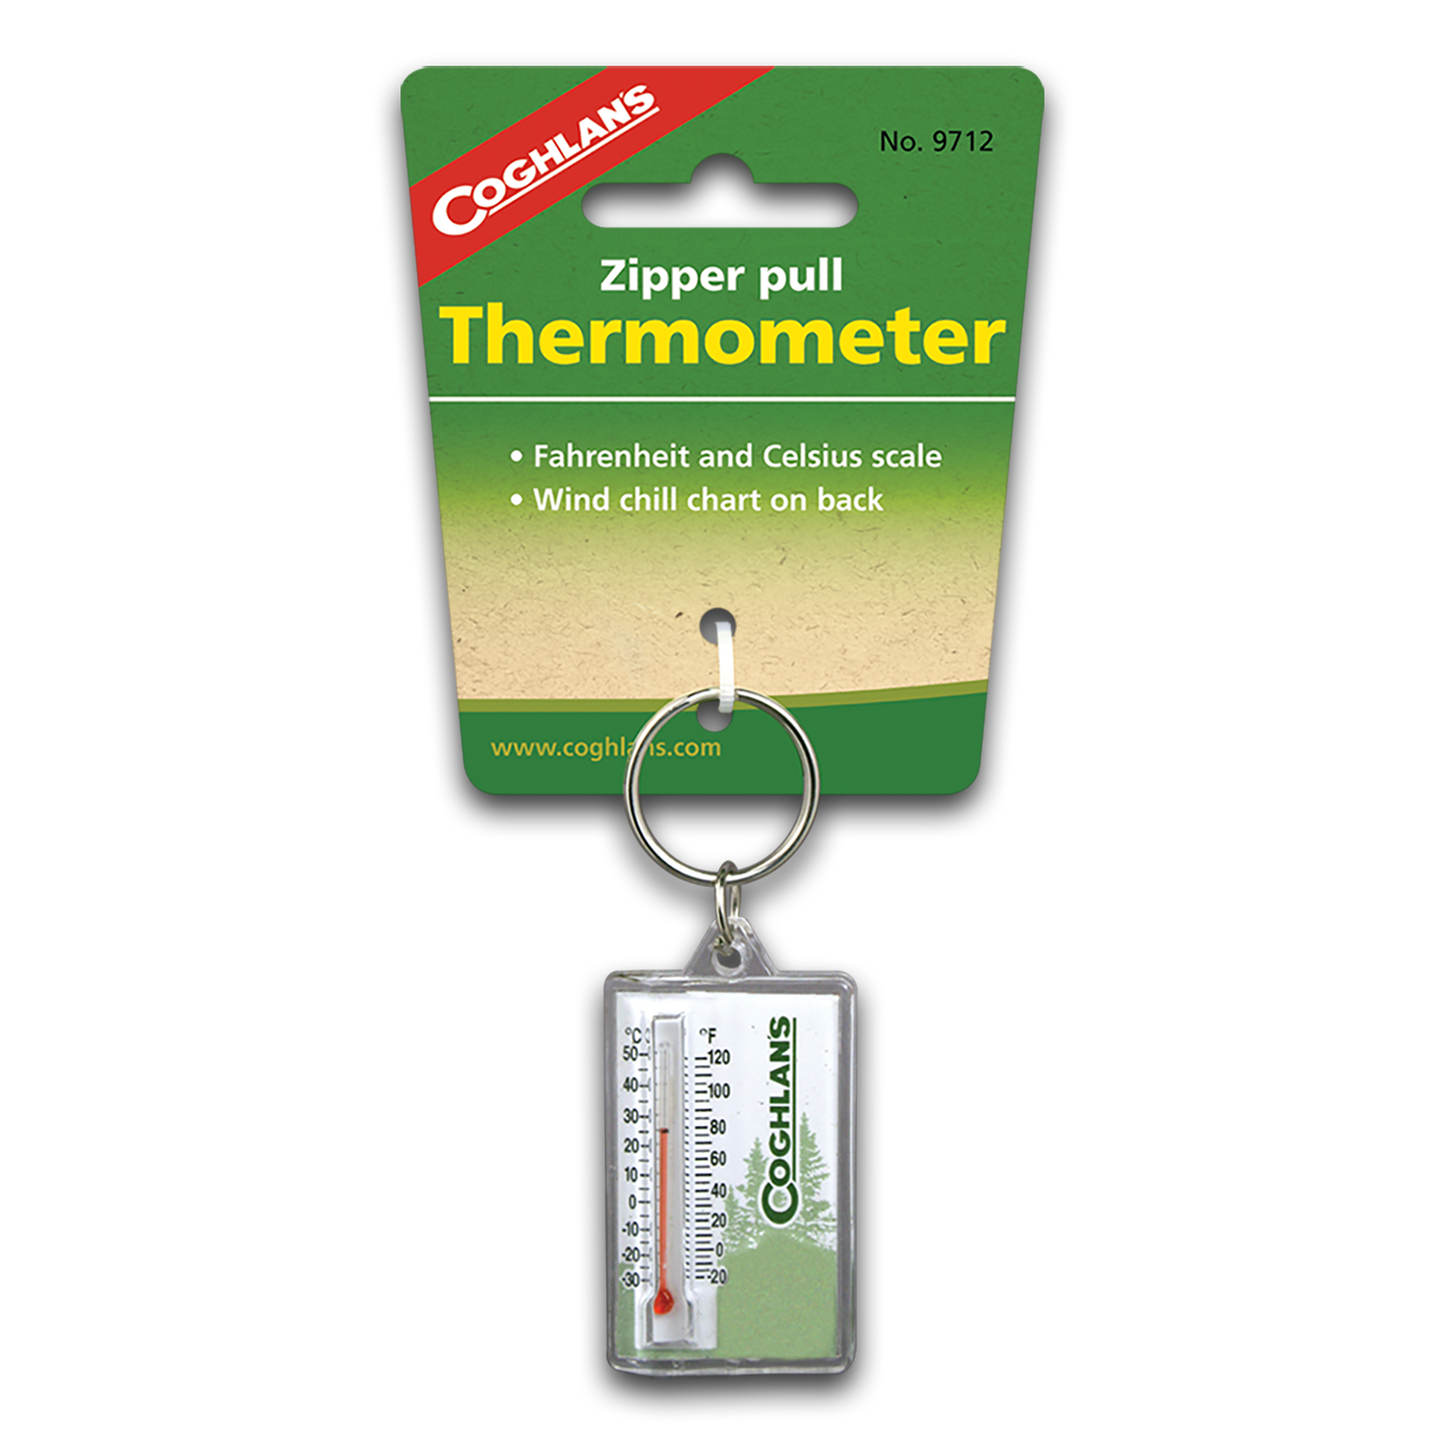 ZIPPER PULL THERMOMETER